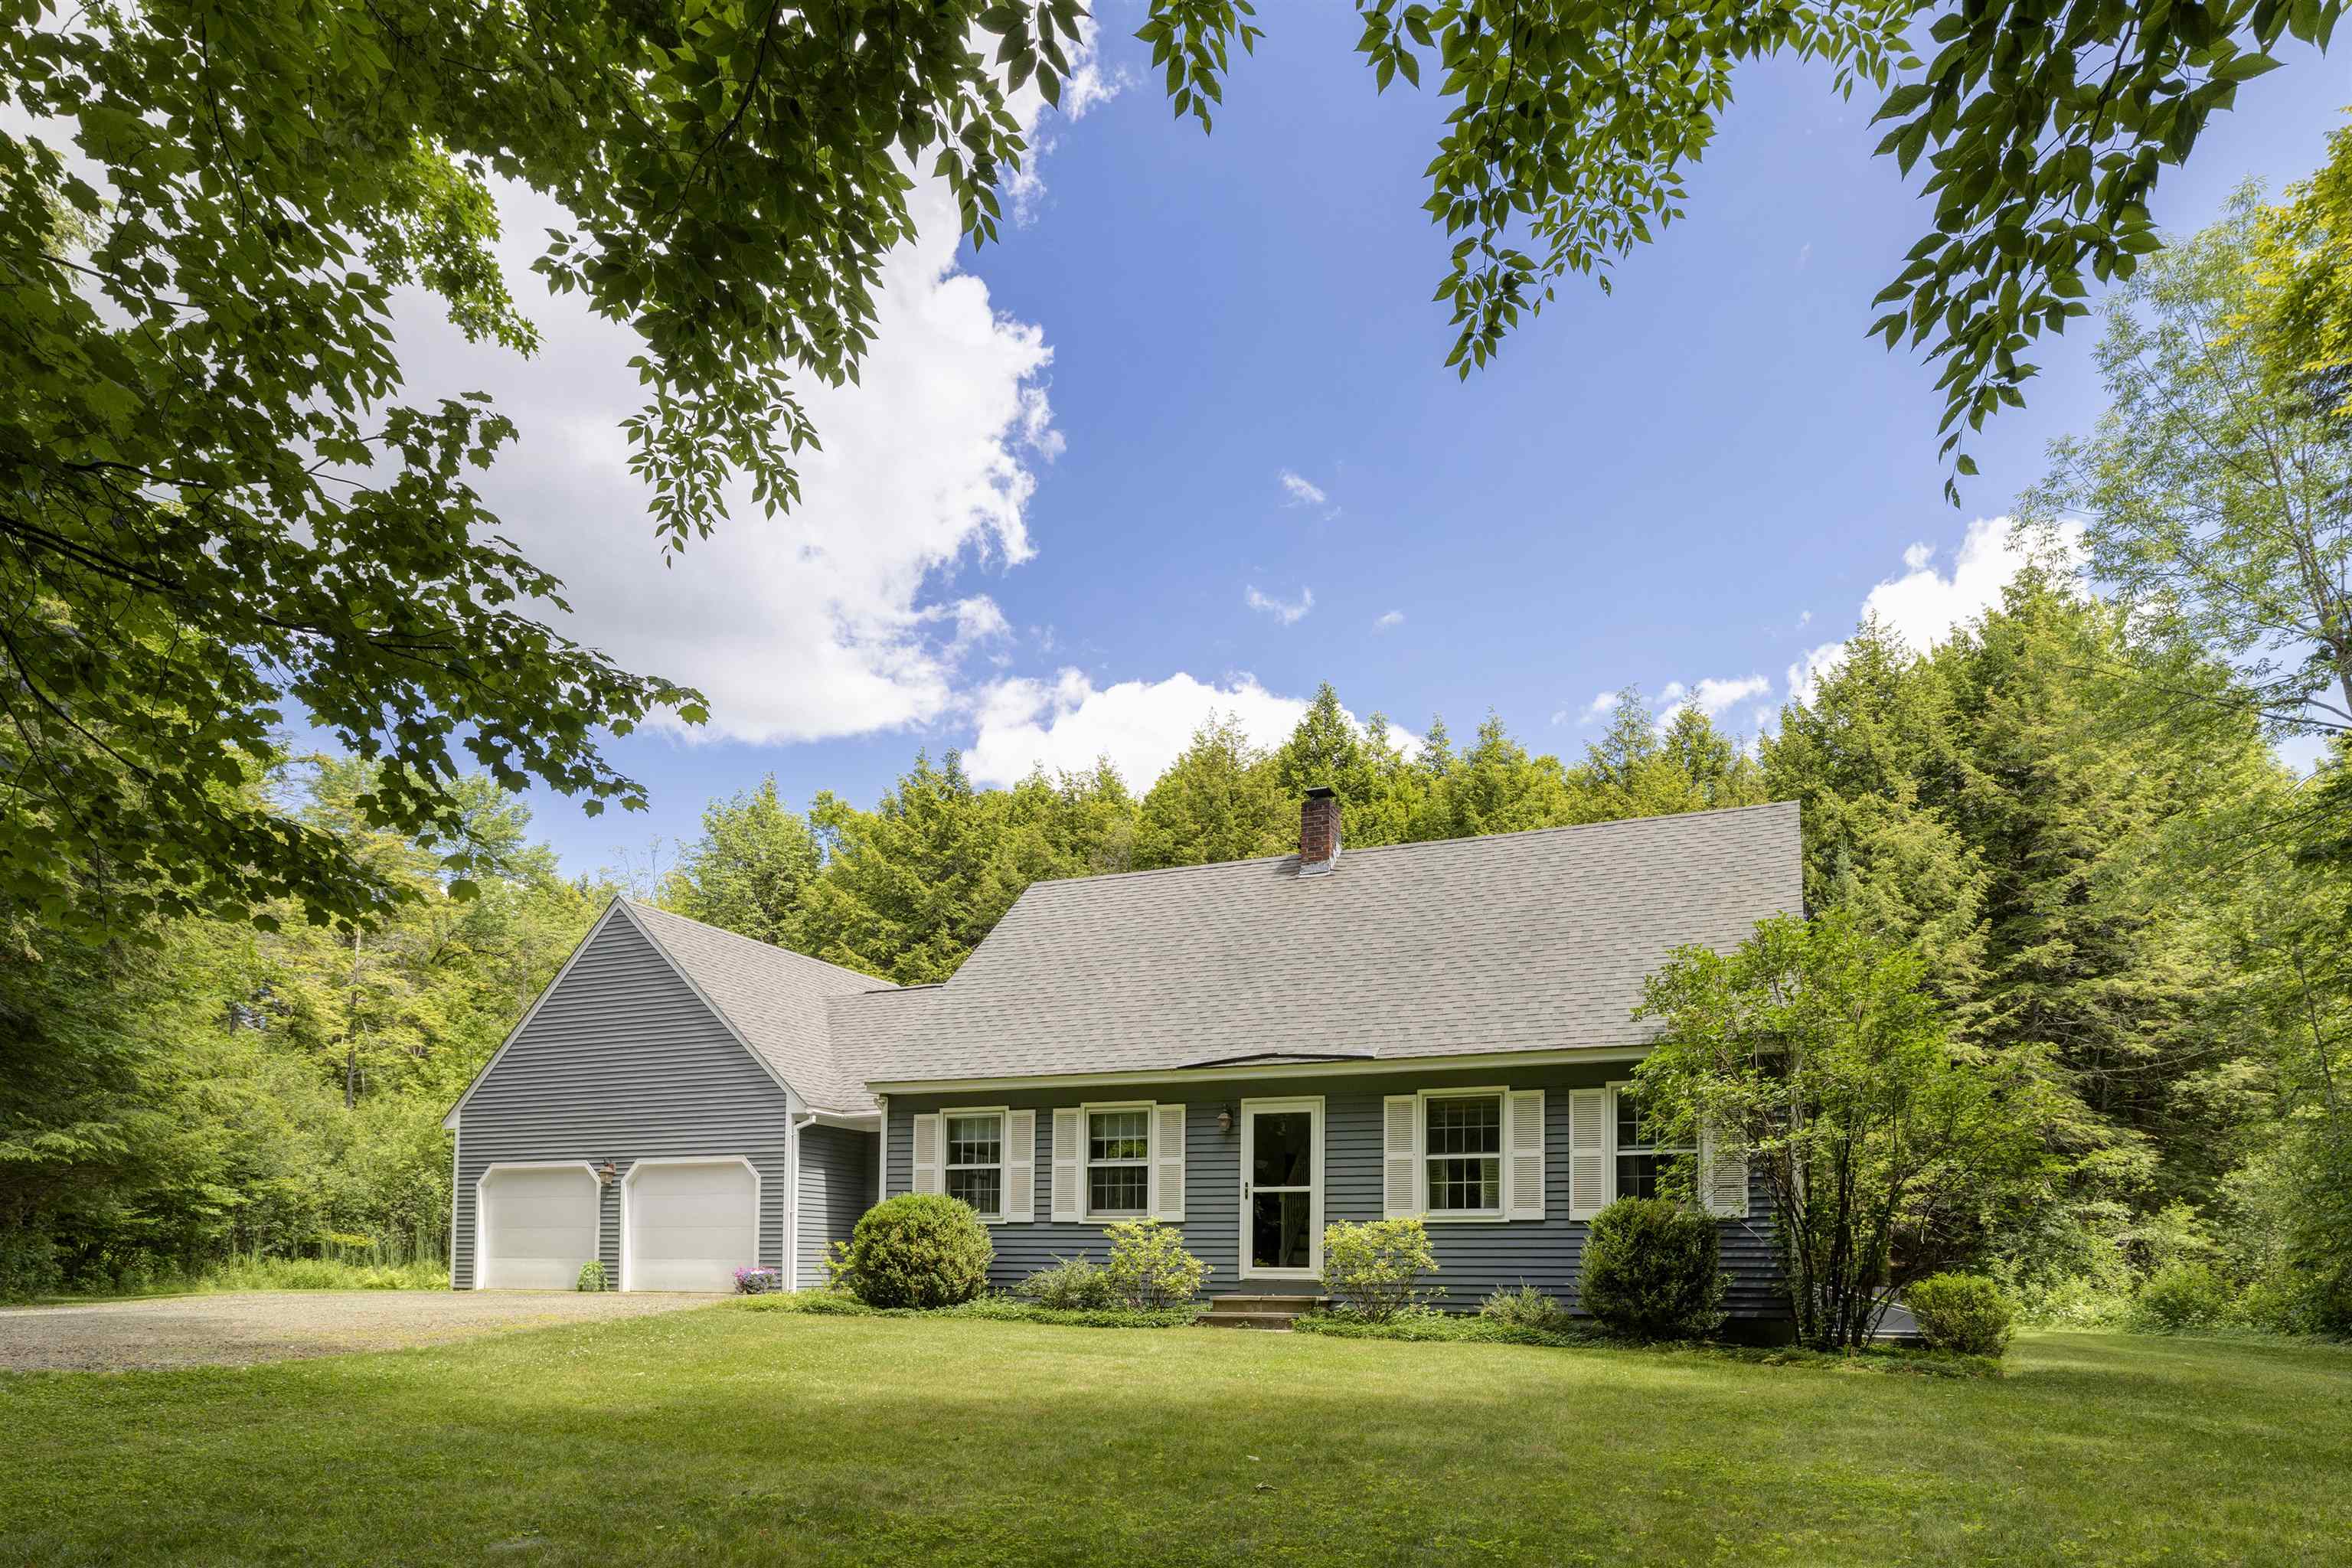 NORWICH VT Homes for sale